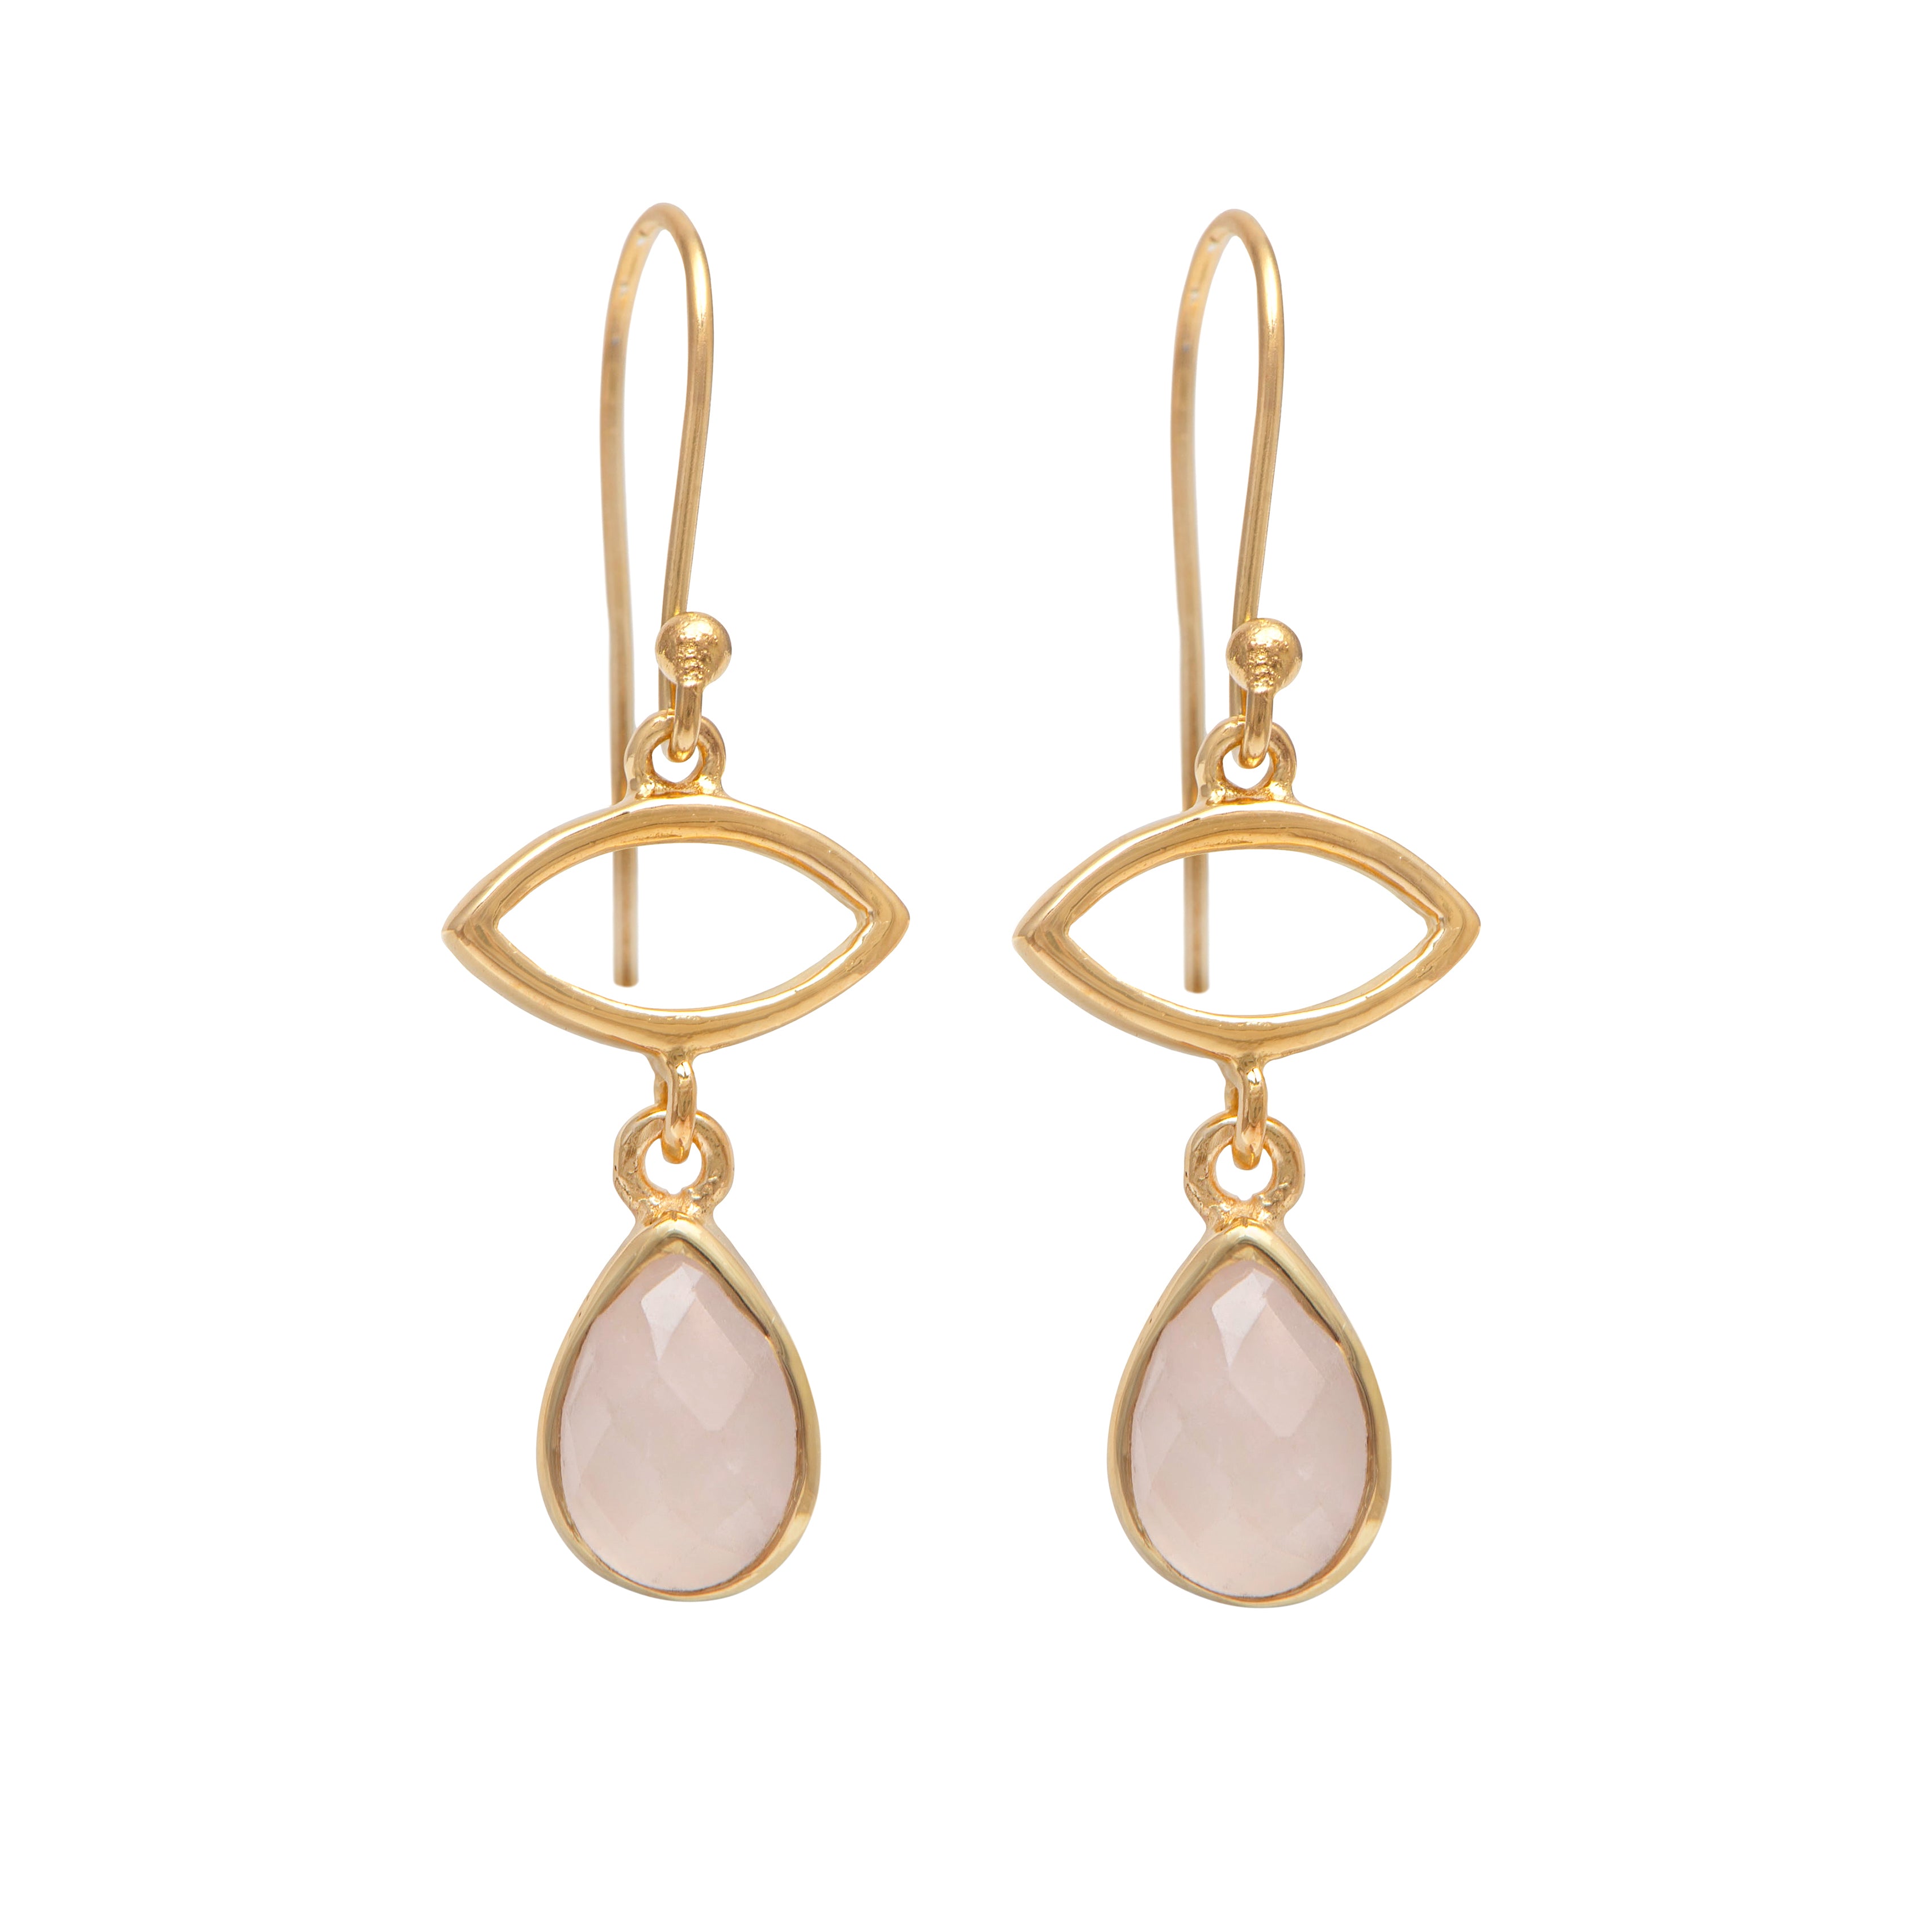 Gold Plated Drop Earrings with Rose Quartz Gemstone